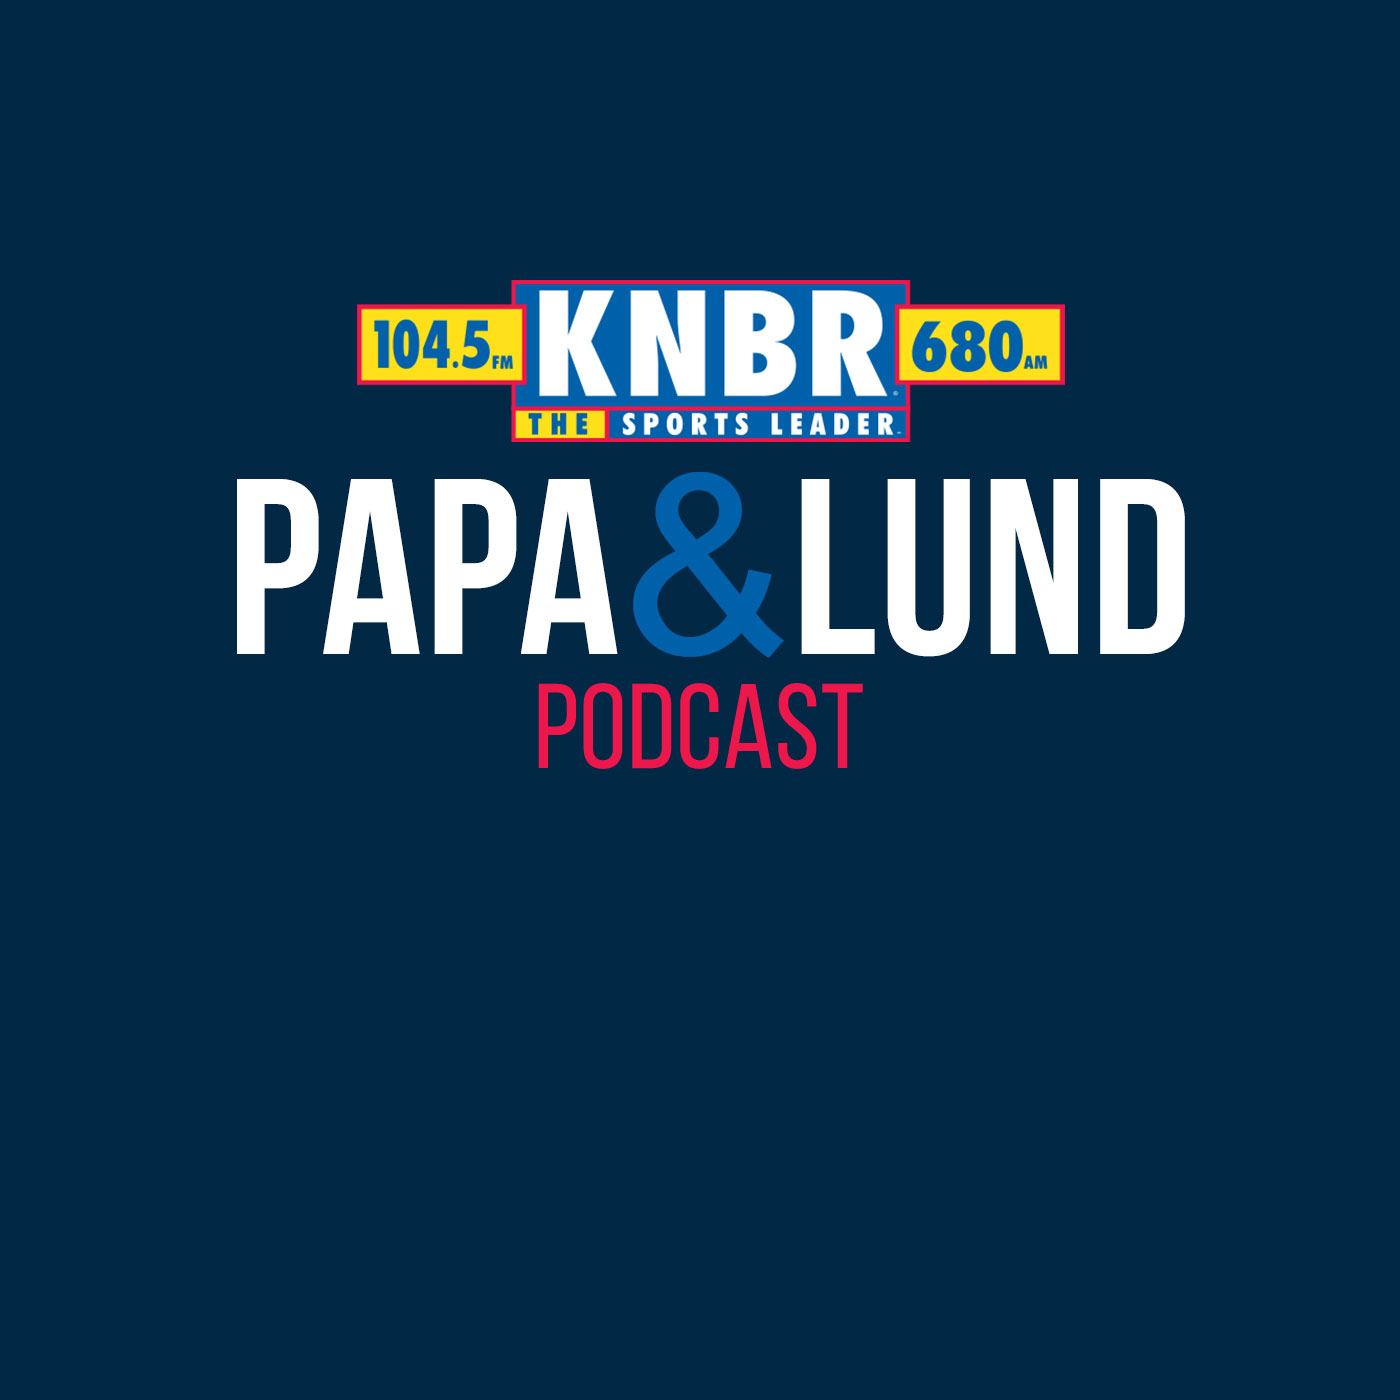 7-25 Ken Korach joined Papa & Lund to preview the Battle of the Bay series